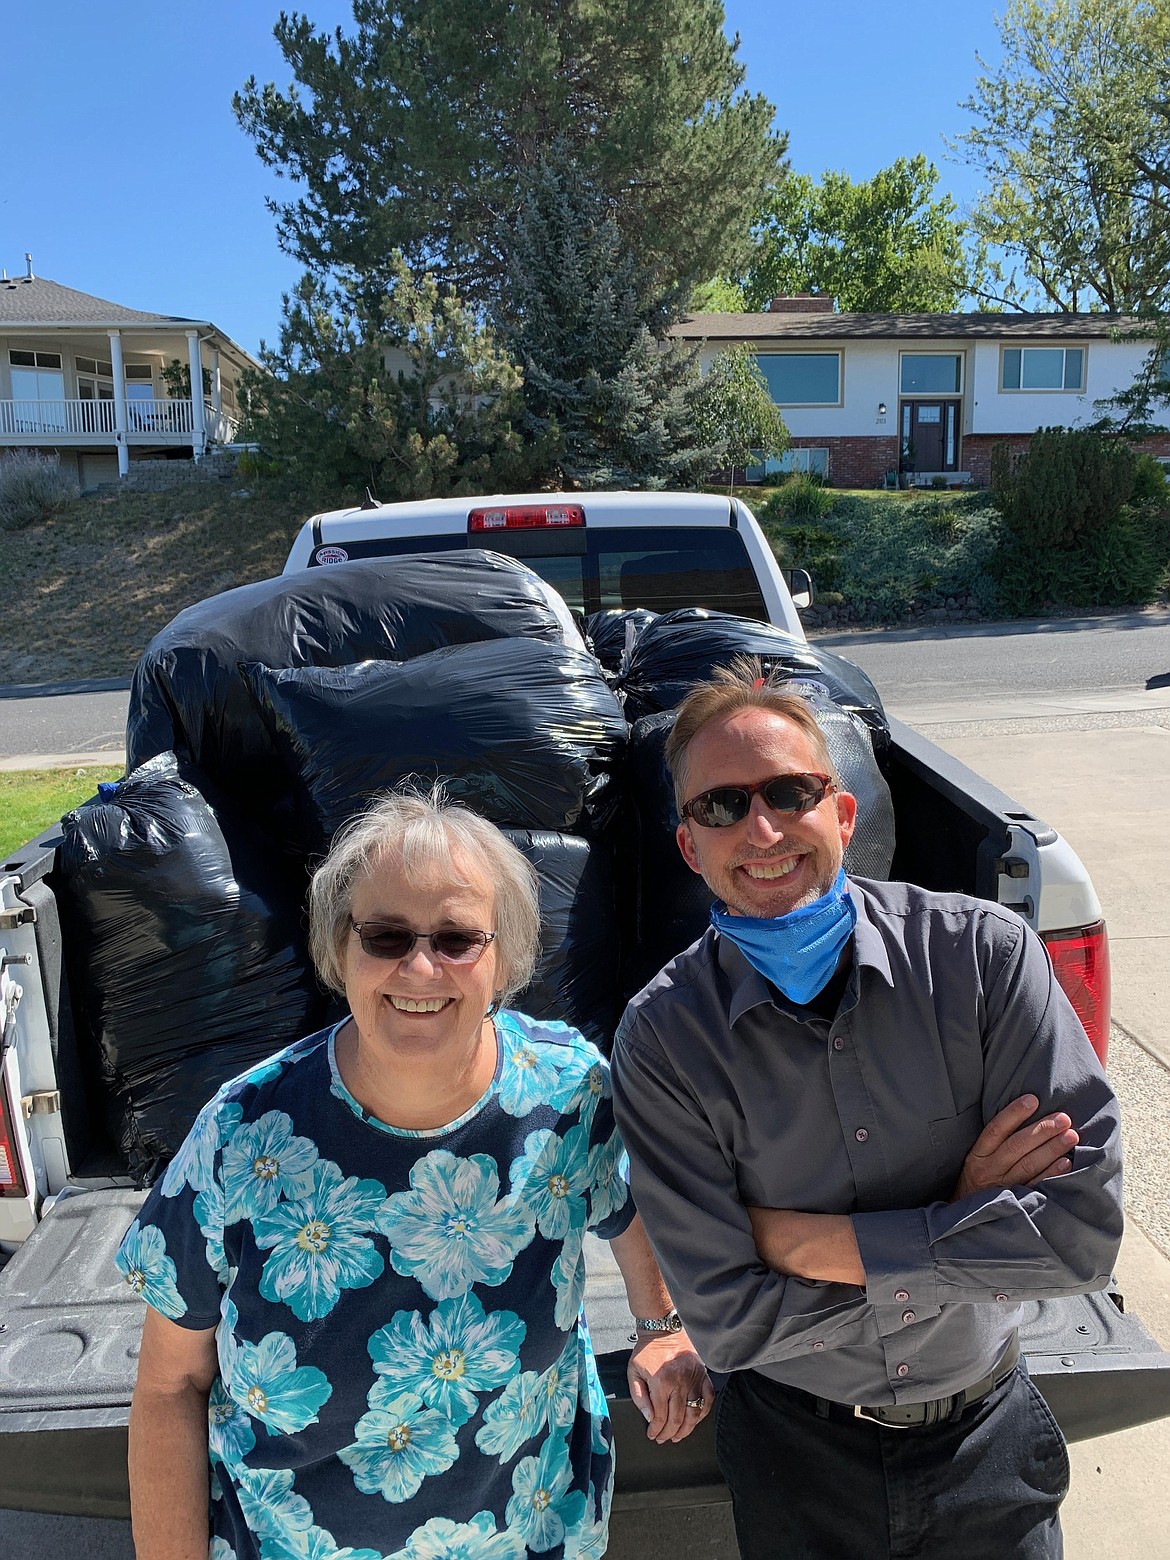 Holly Moos and Steve Ausere smile together after Moos stopped by to drop off 190 coats to be donated for the annual Coats for Kids drive that kicked off on Saturday, Sept. 19.